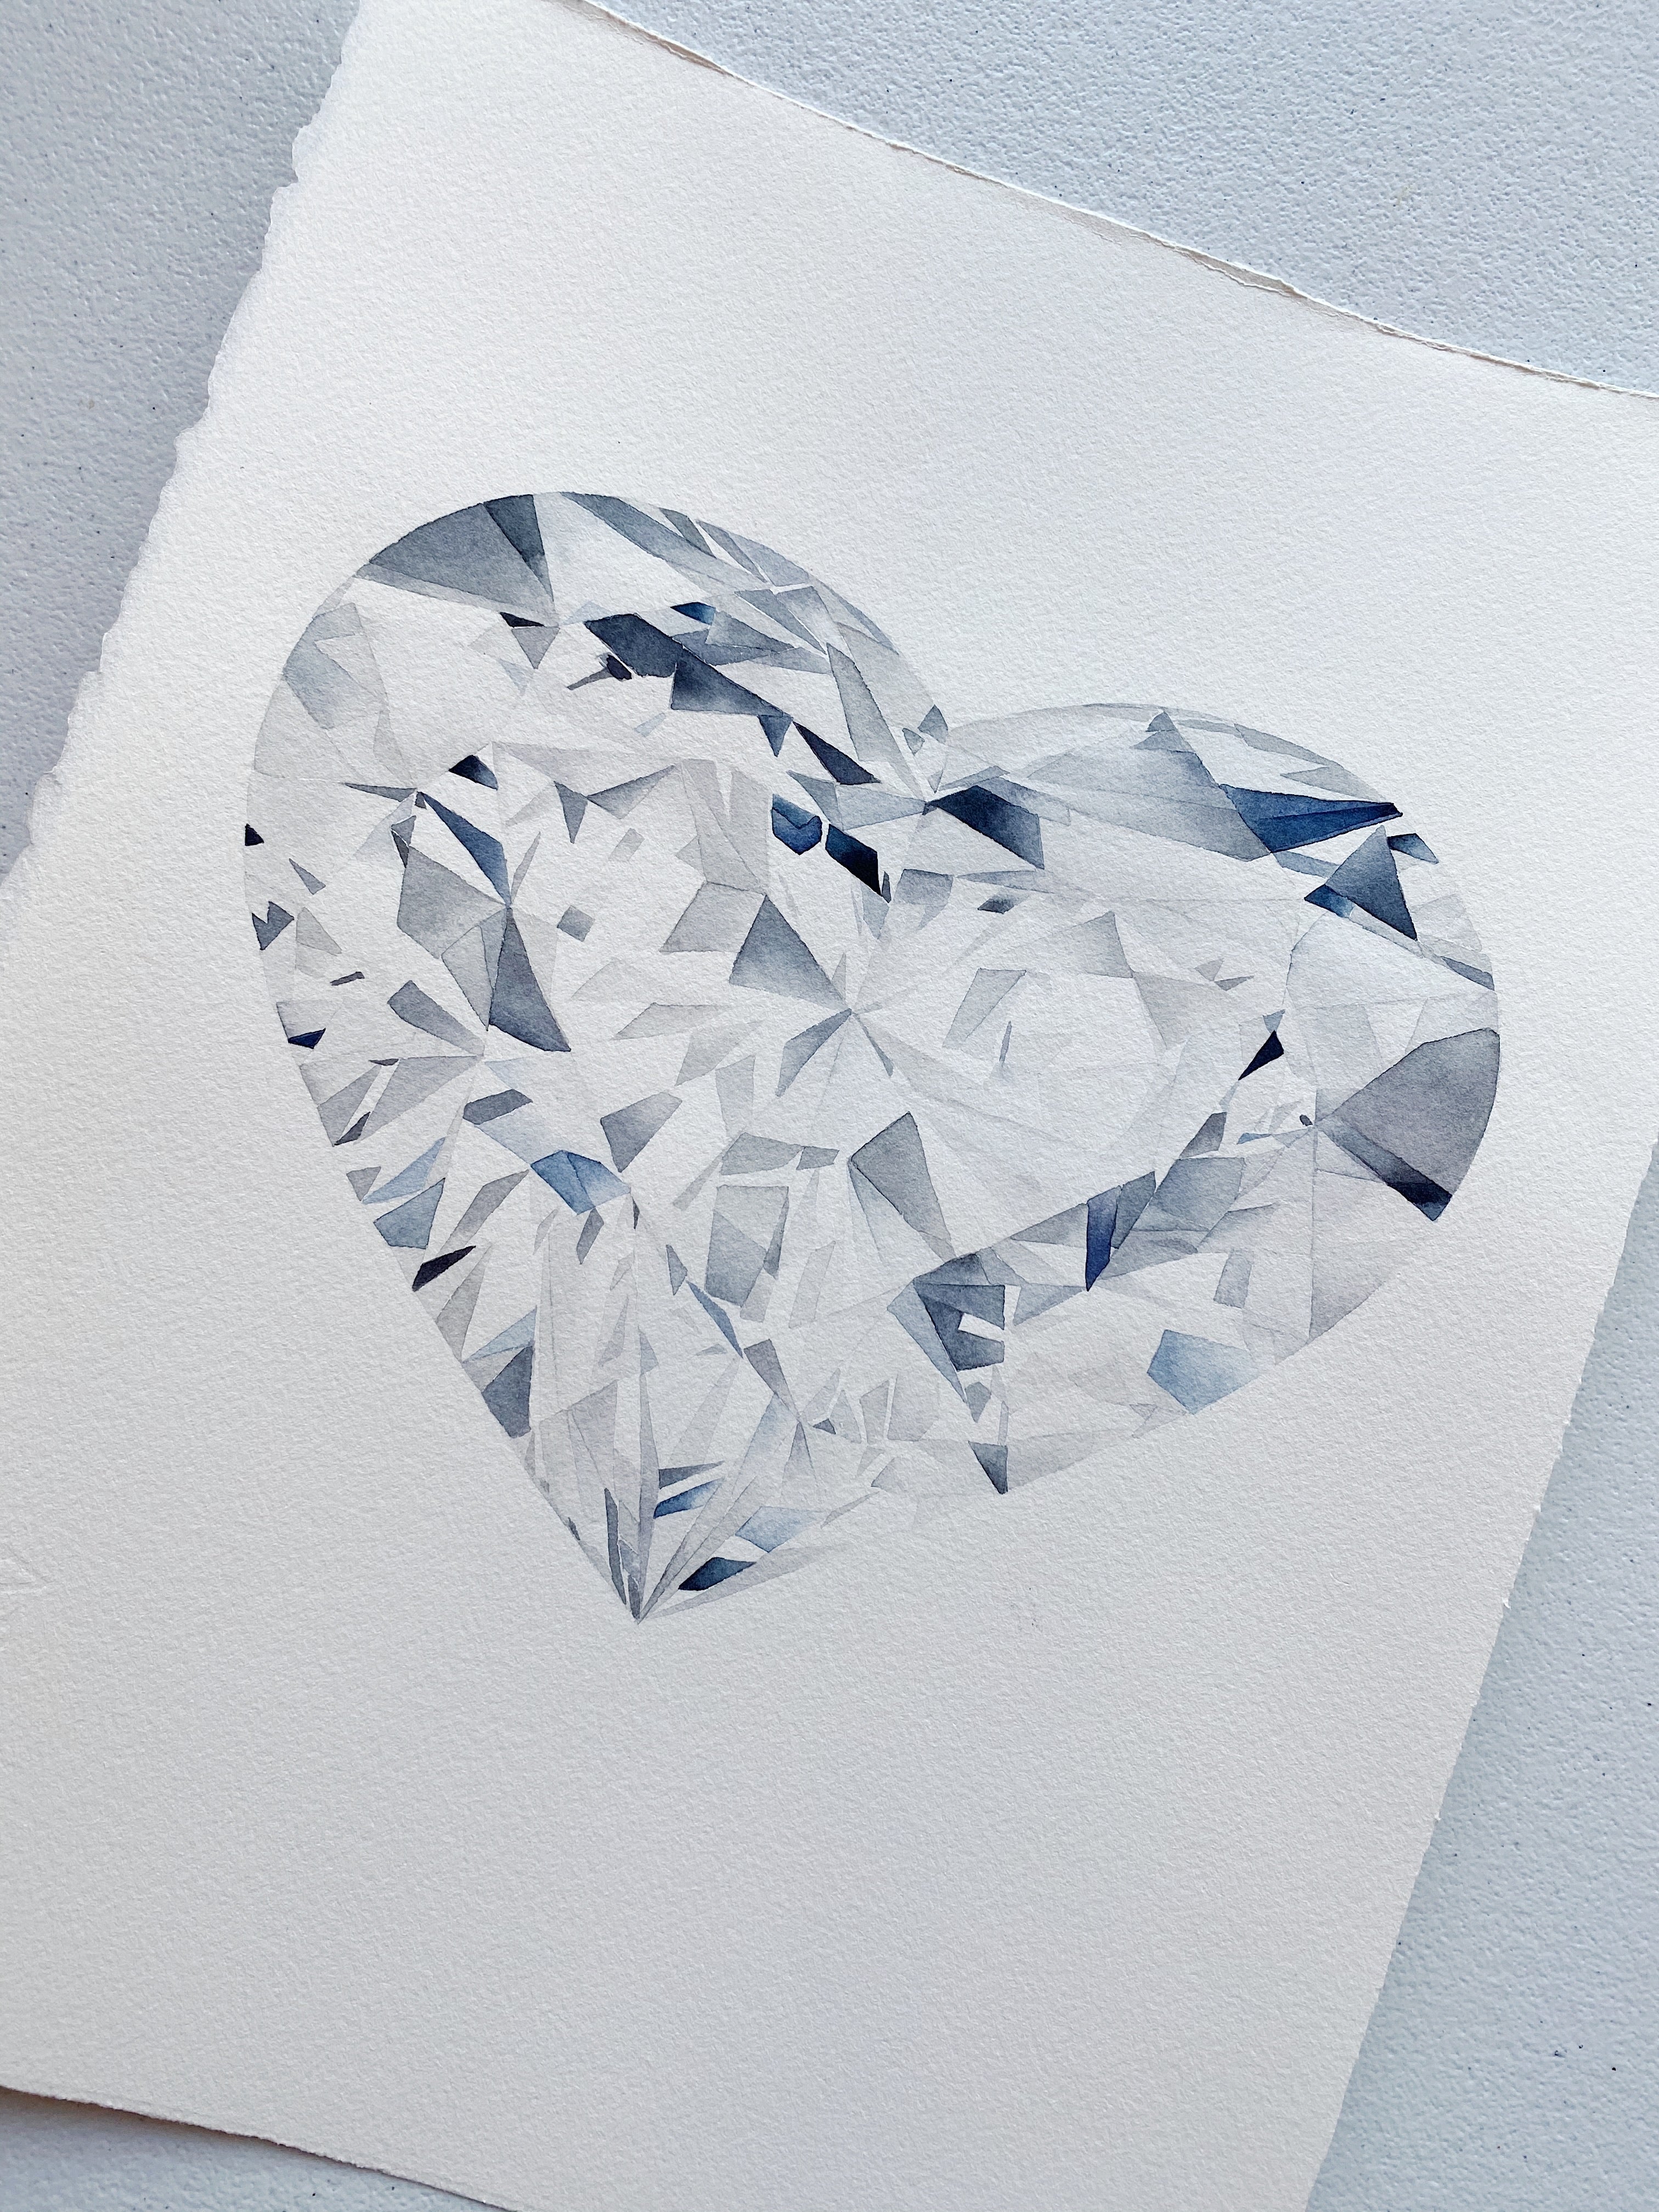 Original Painting - Watercolor Heart Shaped Diamond Painting 11x15 inches